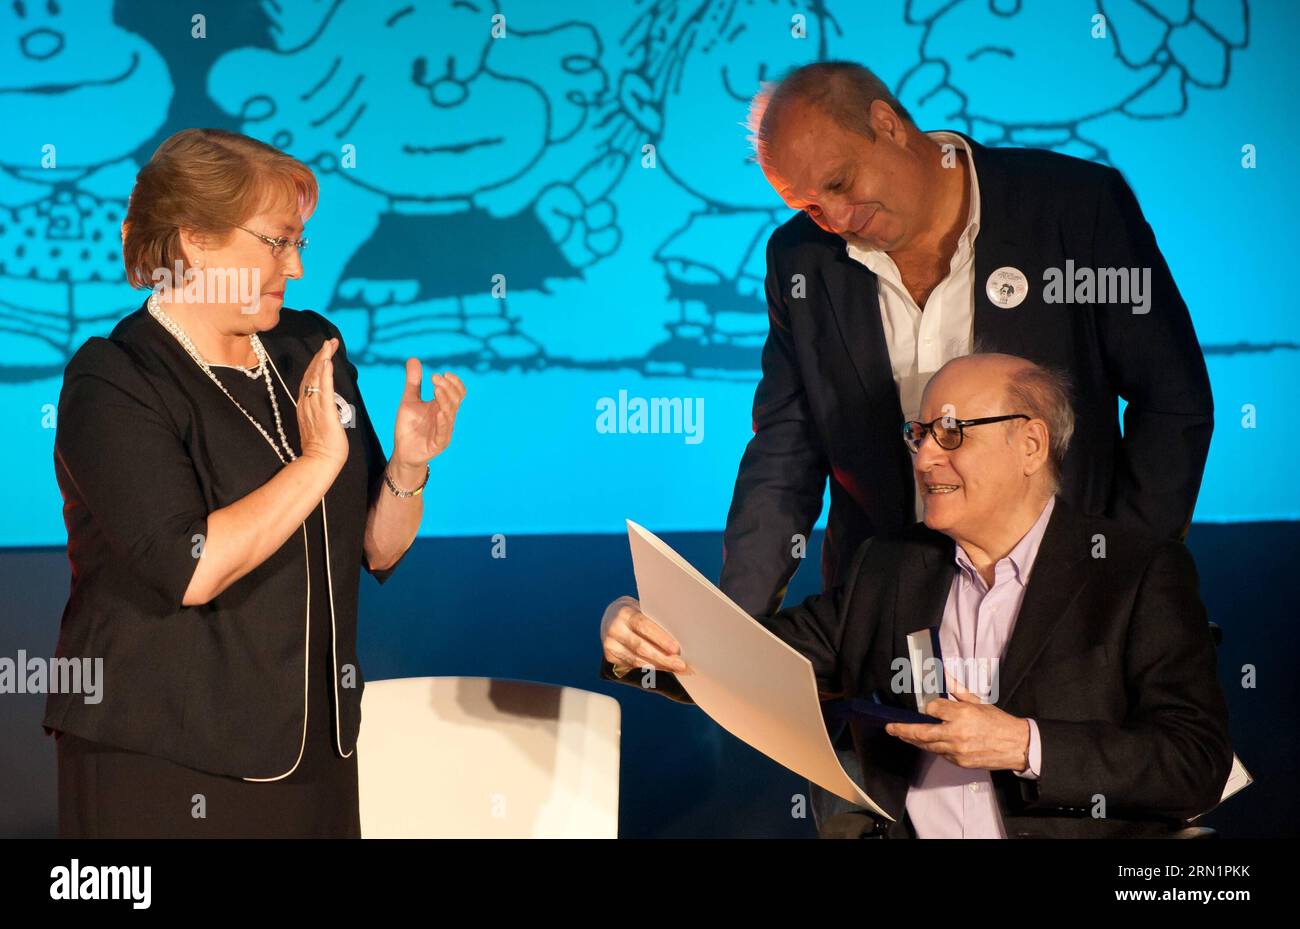 150115 -- SANTIAGO, Jan. 15, 2015 -- Chile s President Michelle Bachelet L, hands over the Order of Artistic and Cultural Merit Pablo Neruda , to Argentine cartoonist Joaquin Salvador Lavado Tejon, better known as Quino R, front, at Gabriela Mistral Cultural Center, in Santiago, capital of Chile, on Jan. 15, 2015. Jorge Villegas jg CHILE-SANTIAGO-ARGENTINA-CULTURE-QUINO e JORGExVILLEGAS PUBLICATIONxNOTxINxCHN Stock Photo